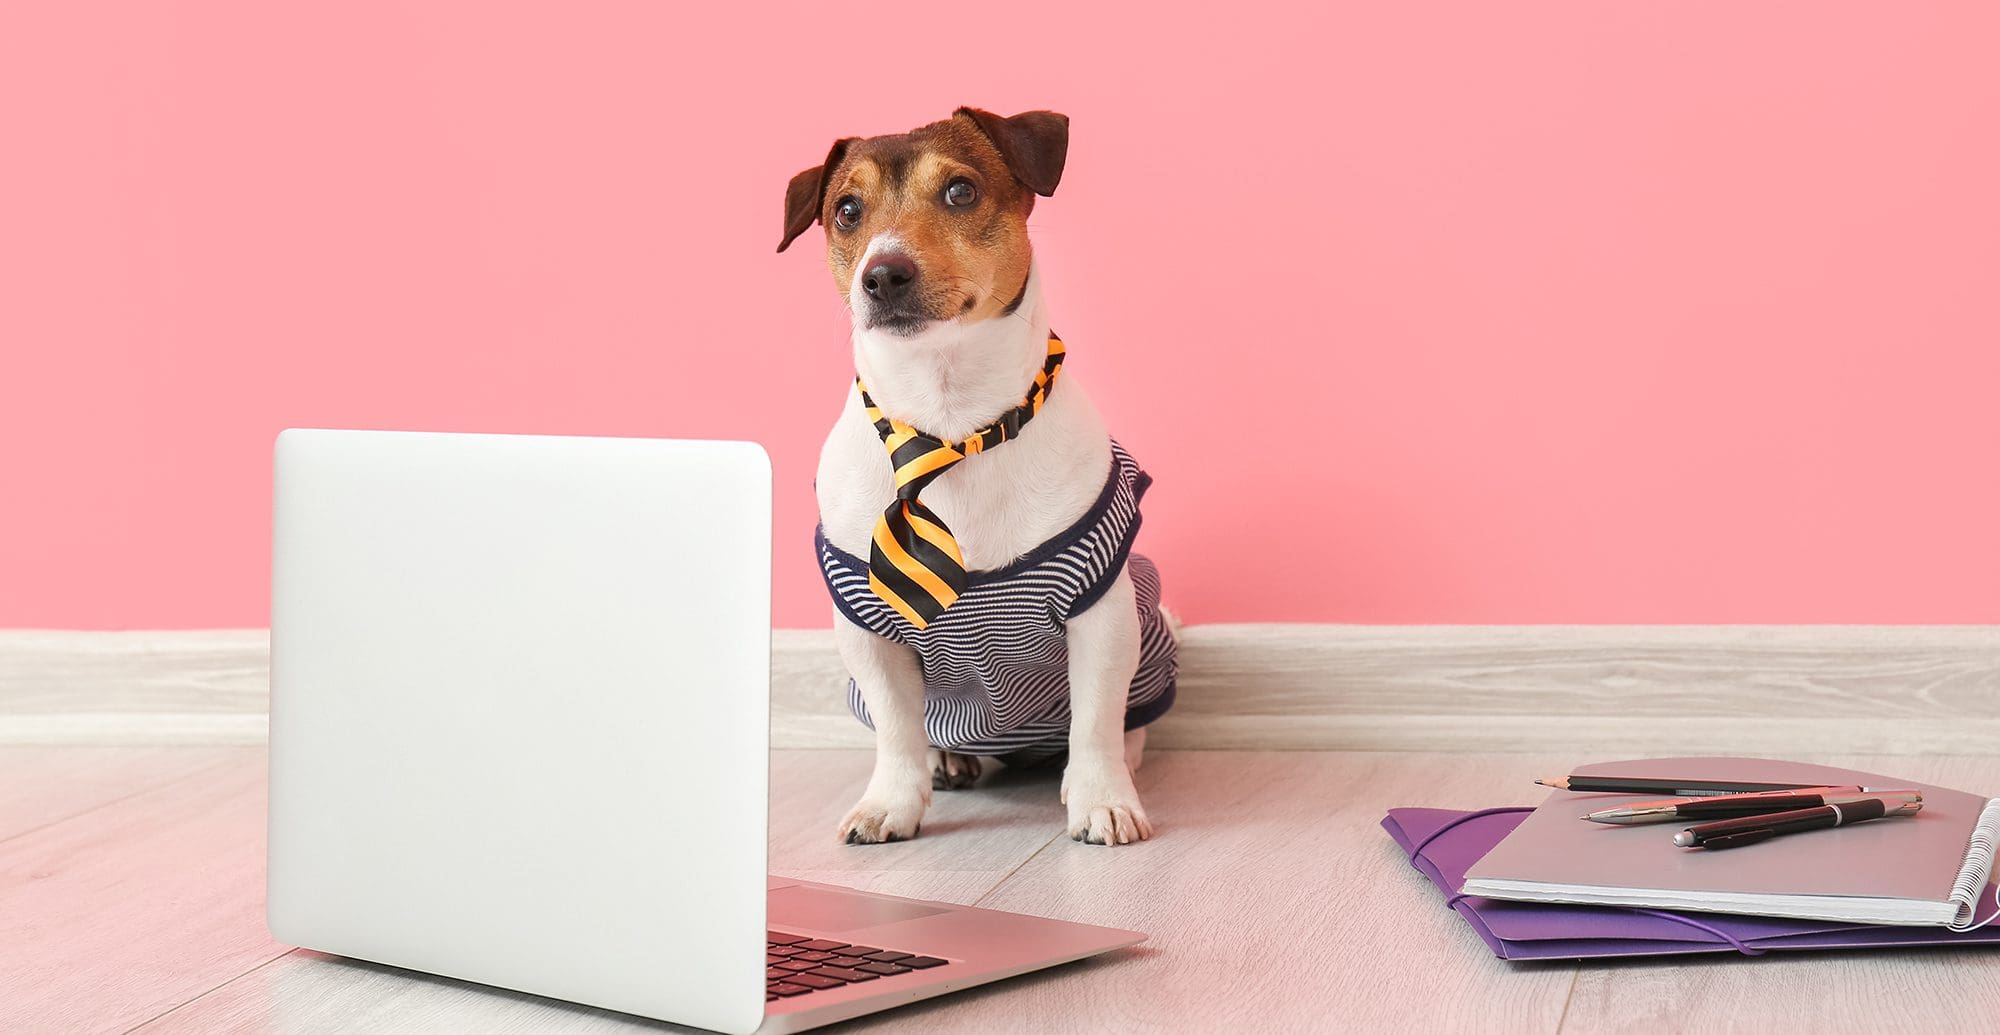 Dog in tie sitting in front of computer.